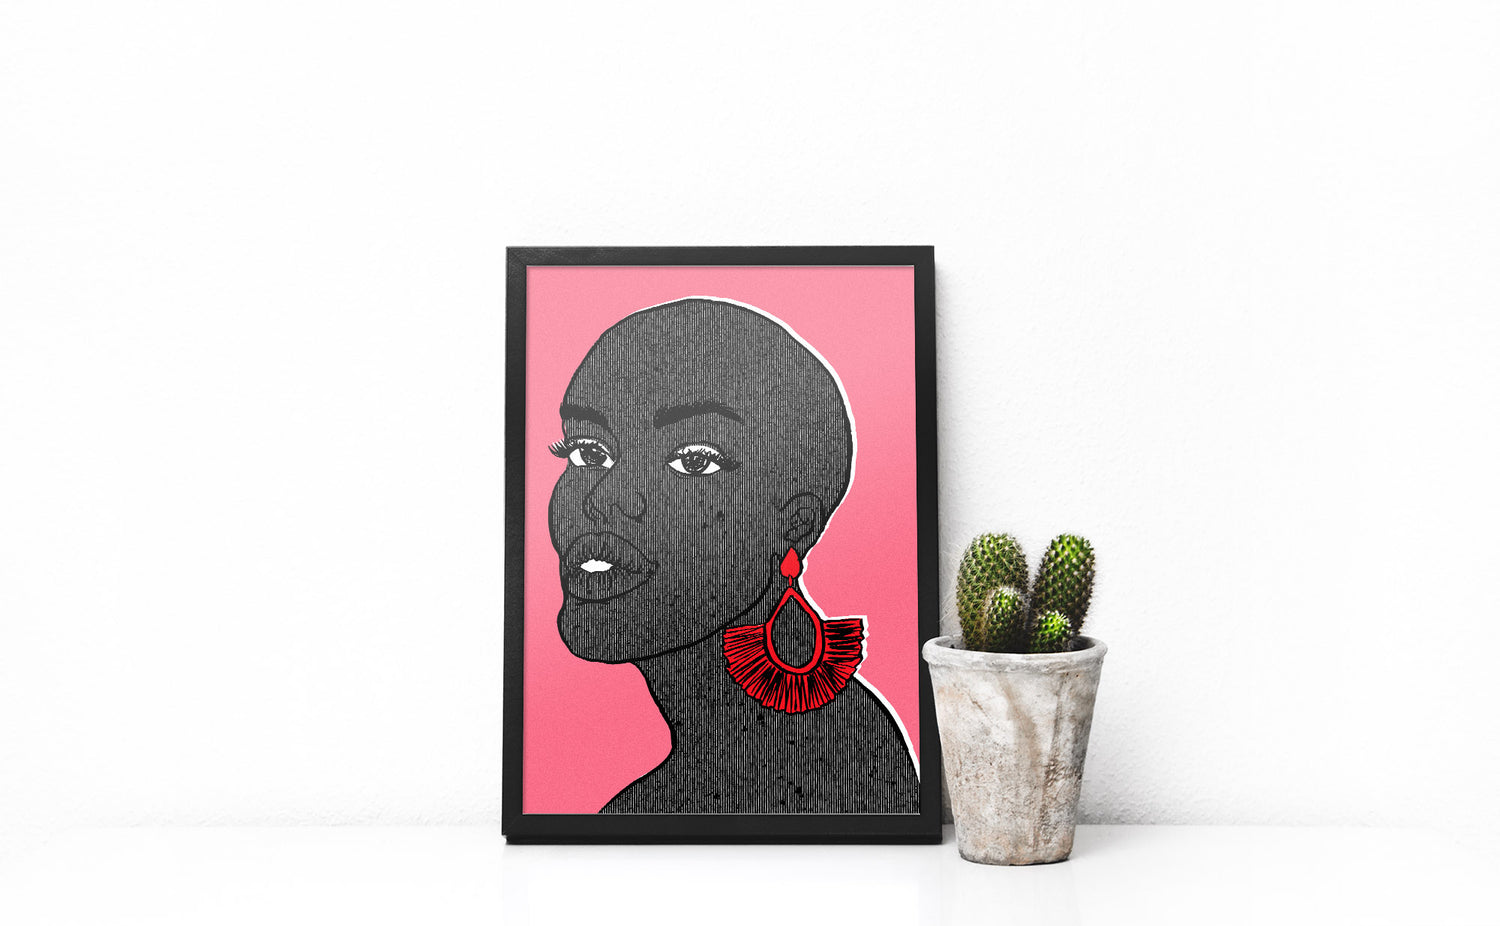 Art print of a bald black woman wearing large red earrings against a pink background by DorcasCreates